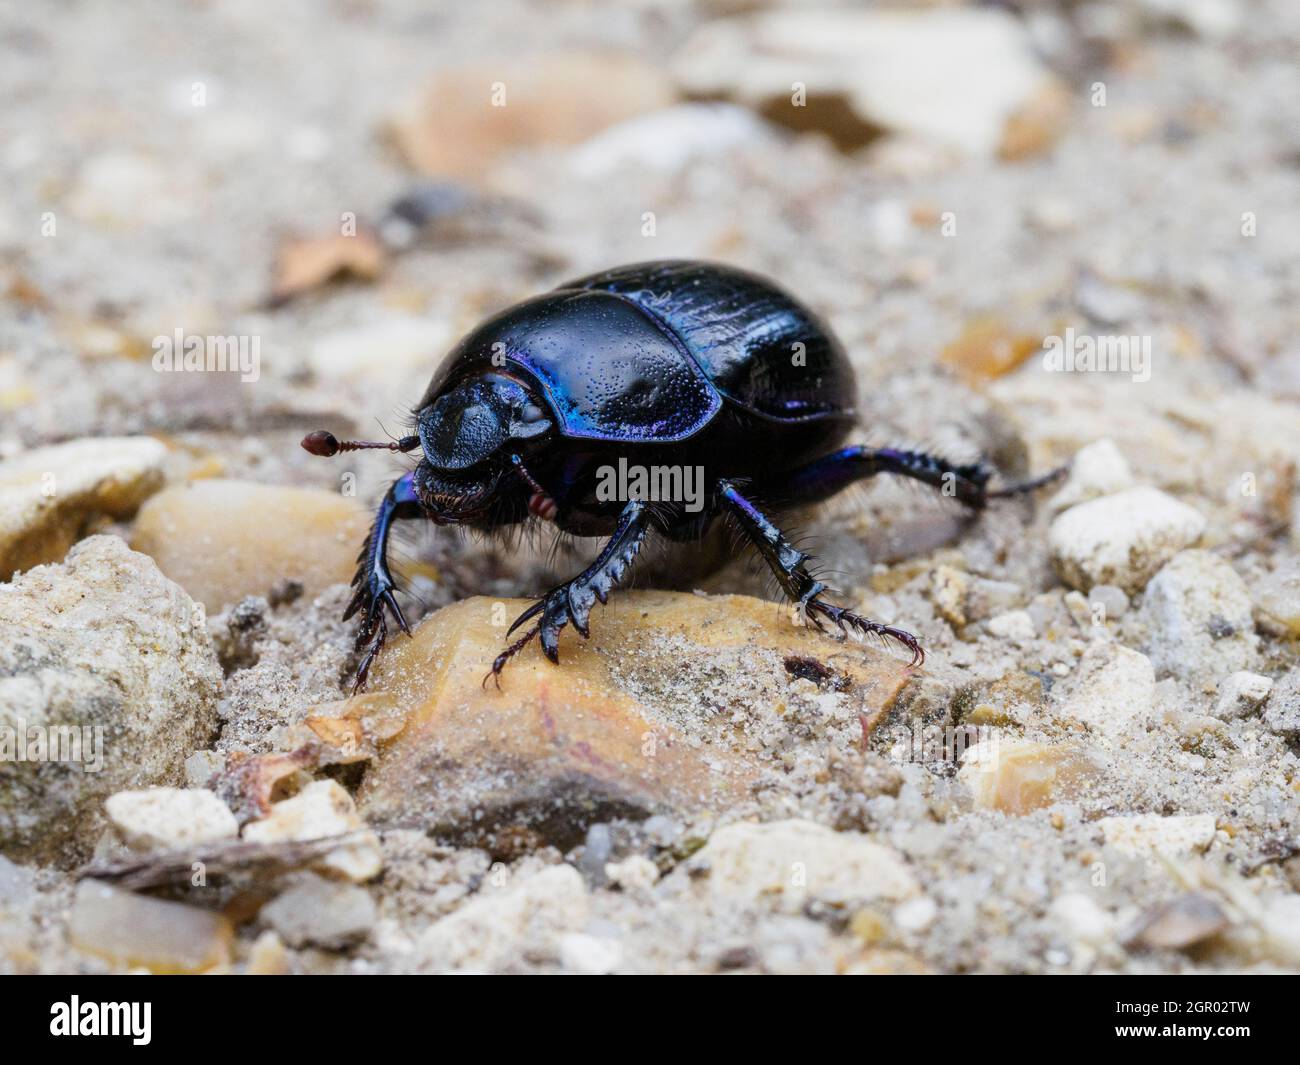 Anoplotrupes stercorosus, Dor Beetle, The New Forest, Royaume-Uni Banque D'Images